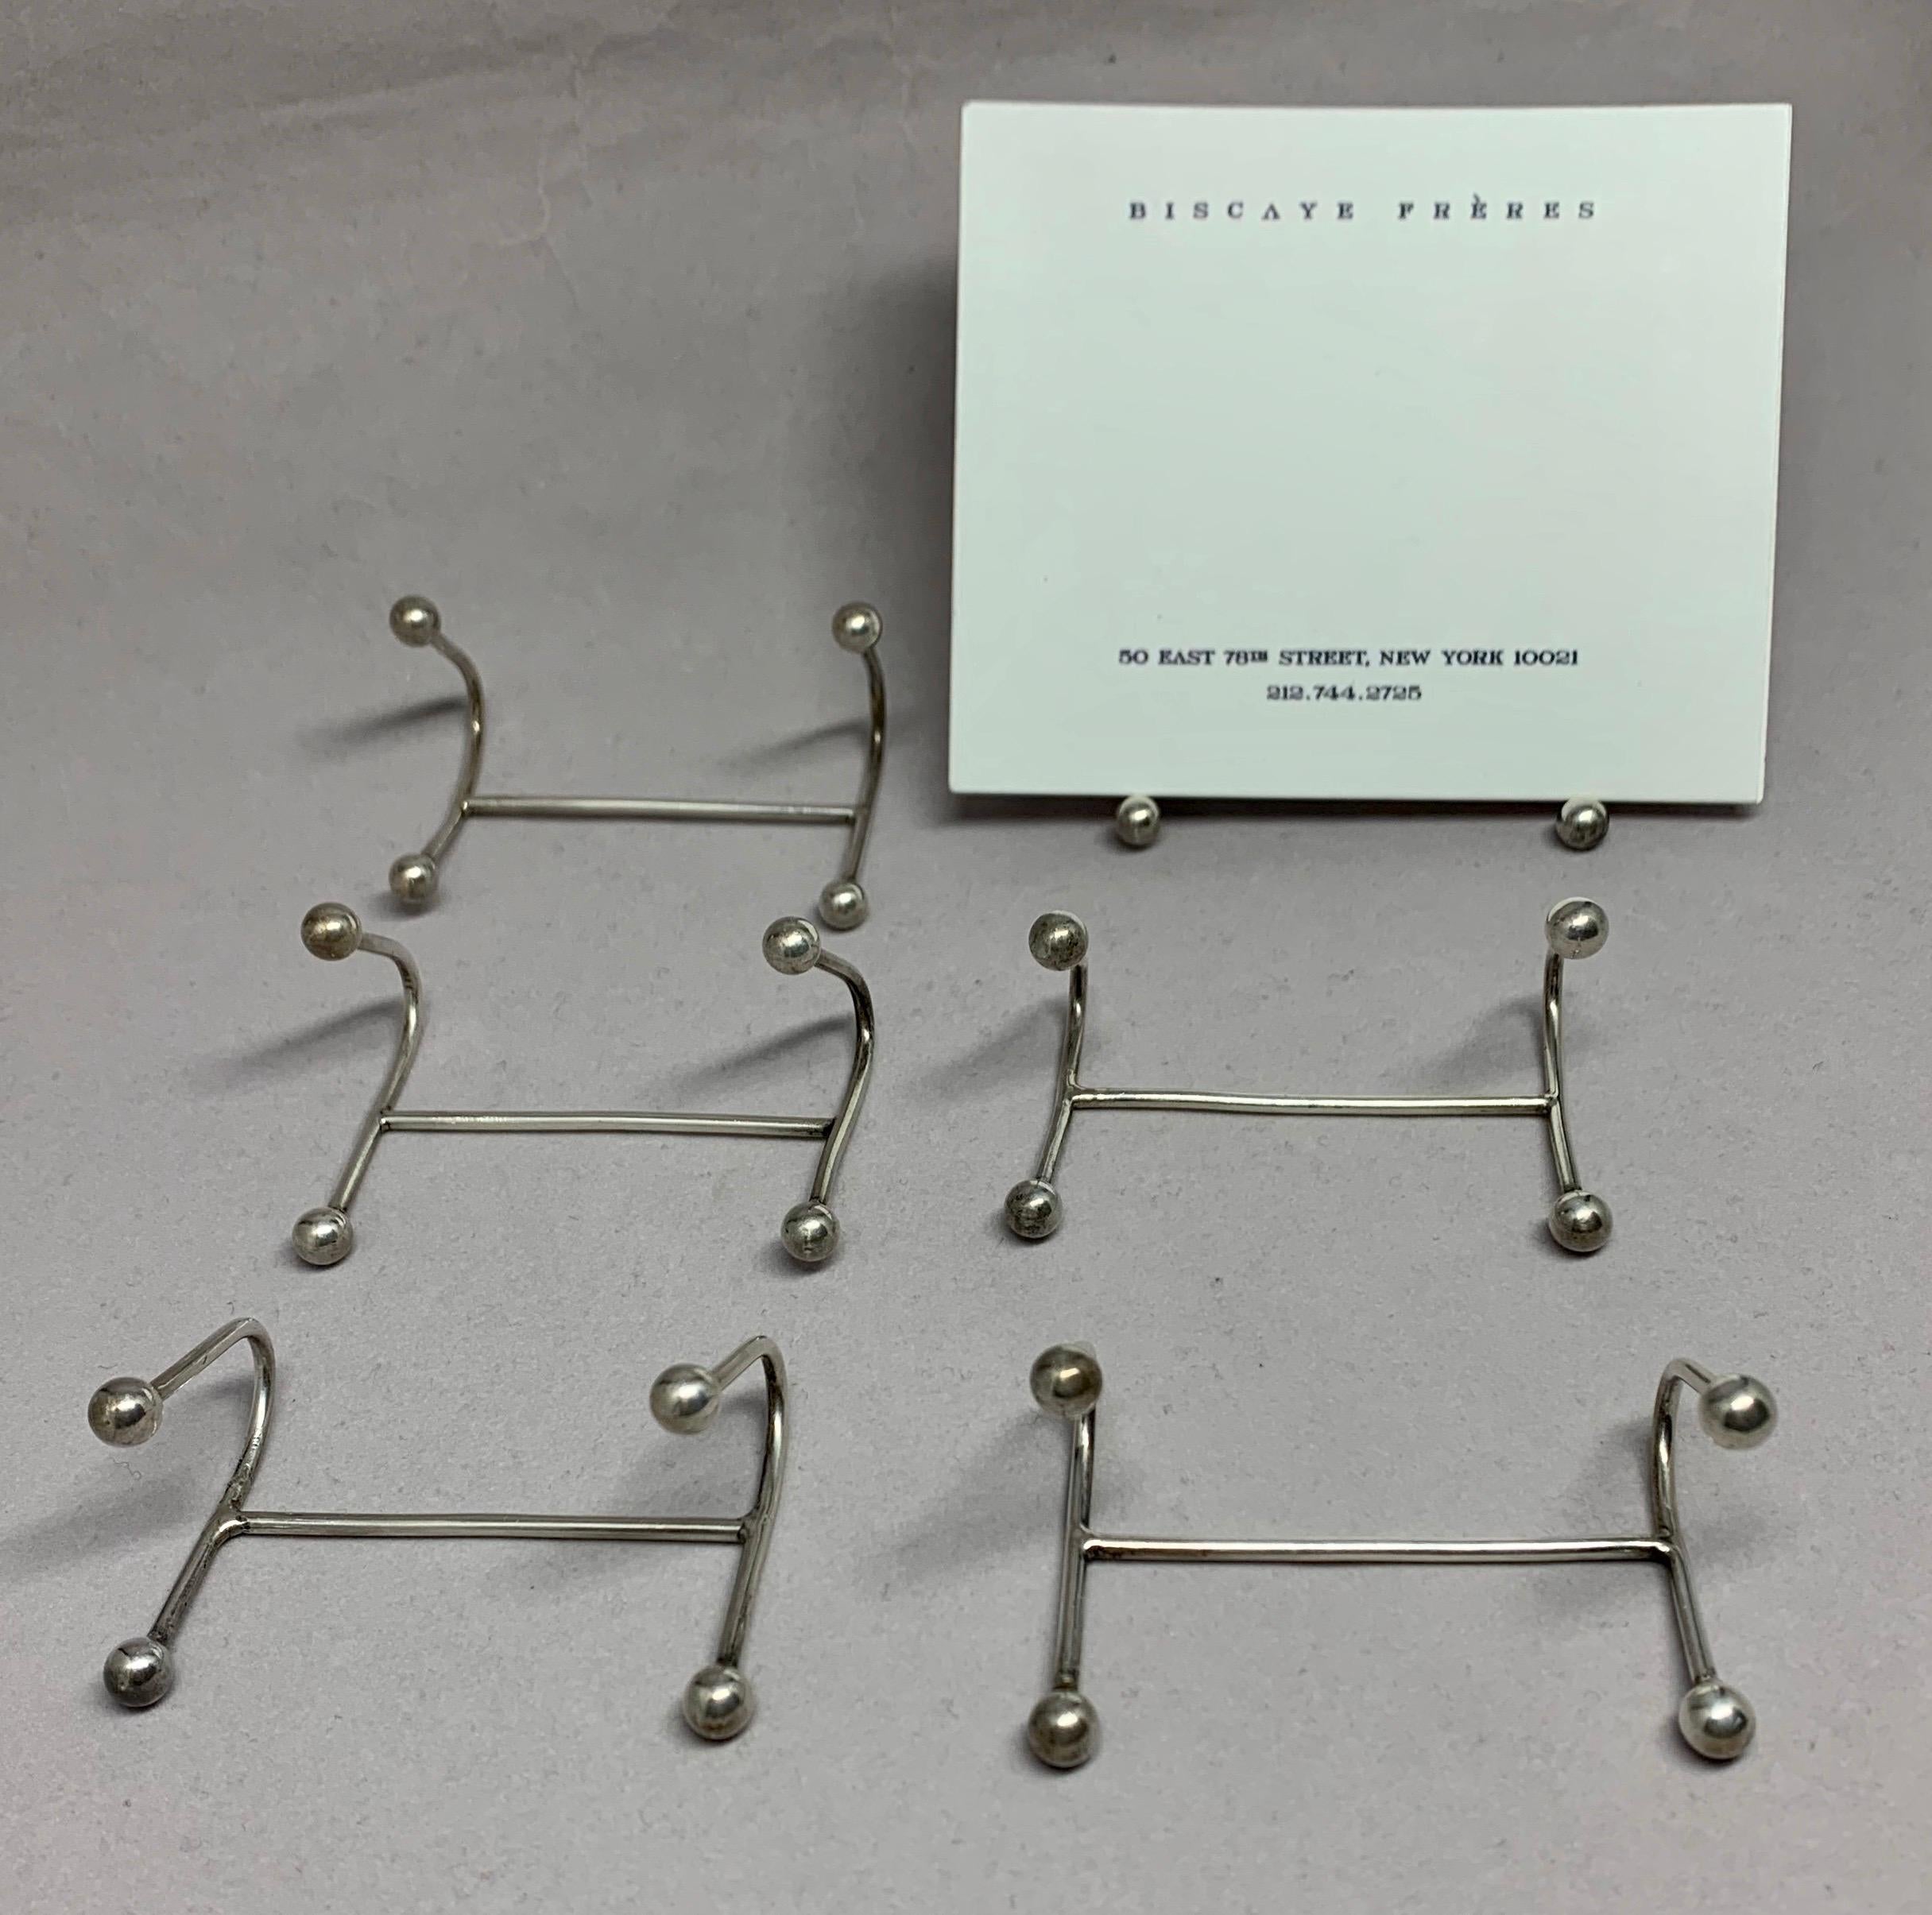 Six vintage sterling silver place card holders. Set of six midcentury silver place card holders in simple modern form with ball terminals; stamped 